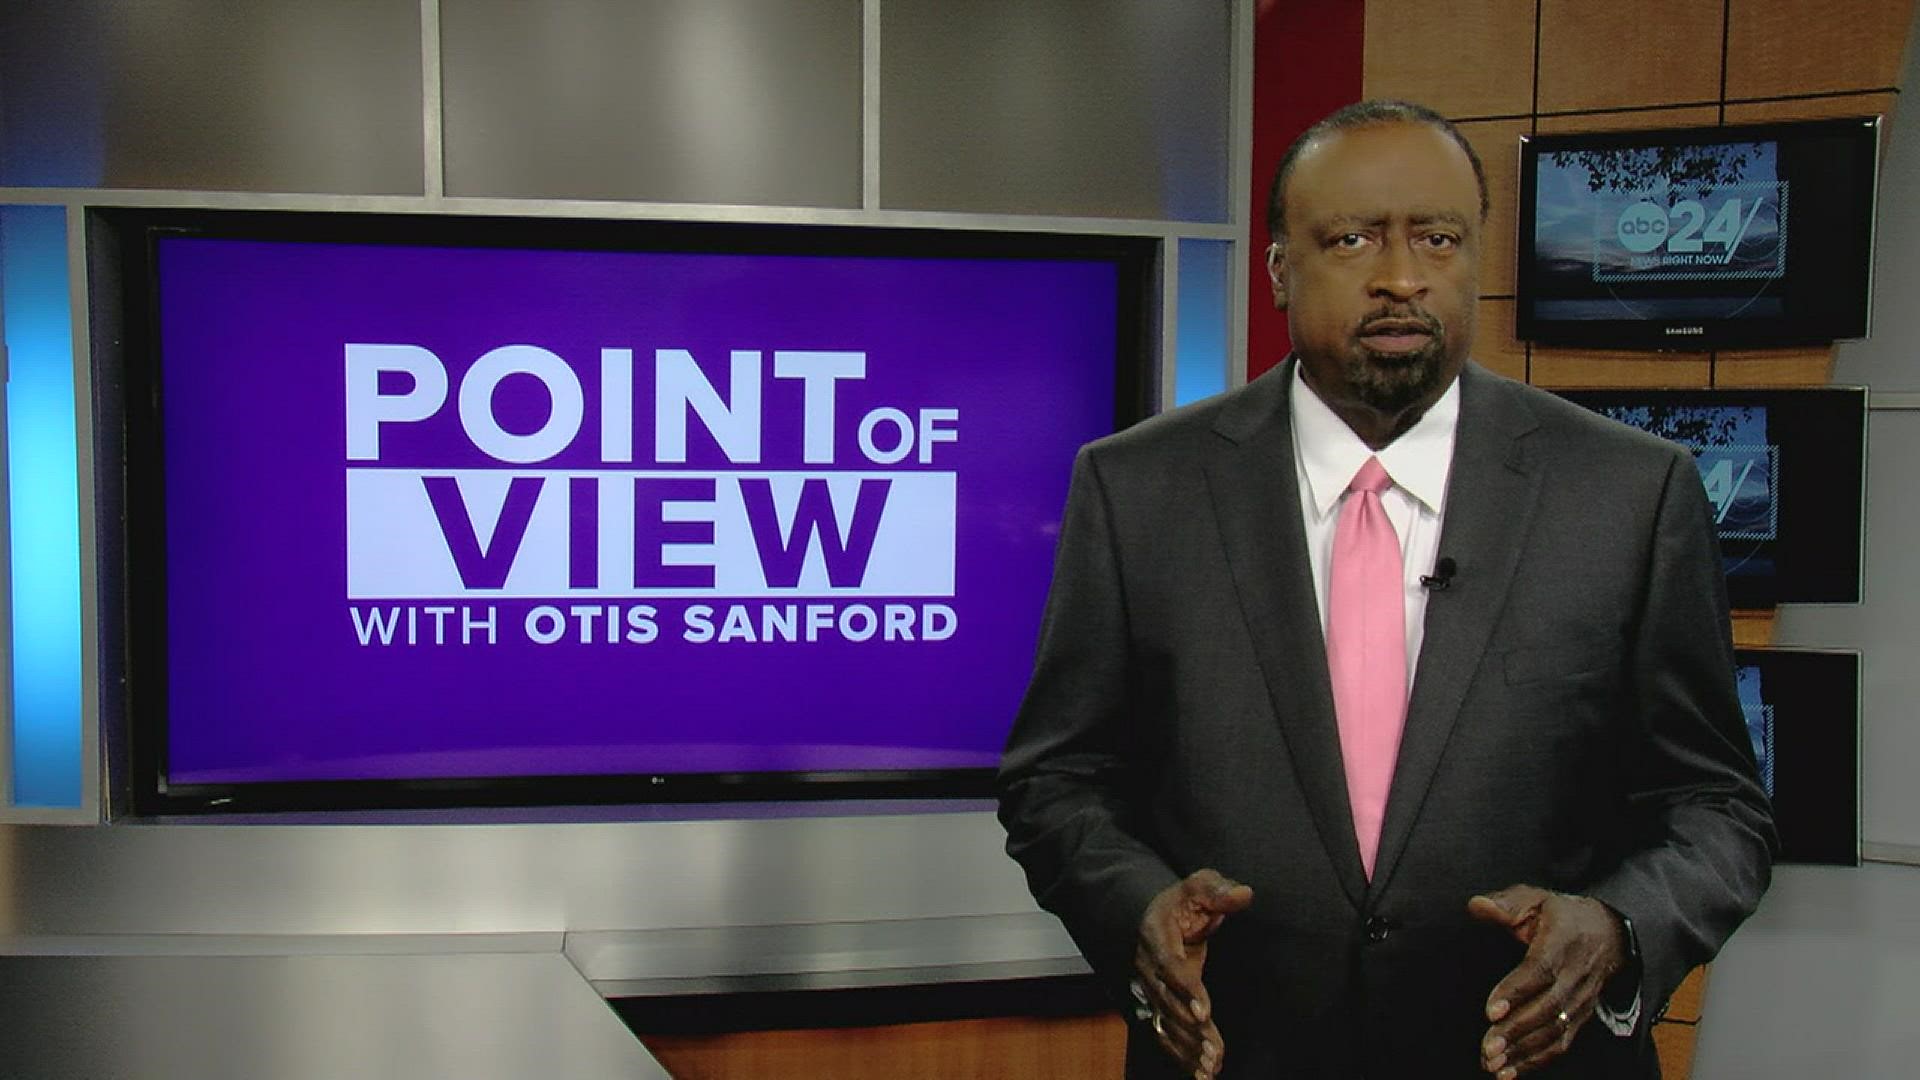 Political analyst and commentator Otis Sanford shared his point of view on the Tennessee special legislative session that will take up Ford's Blue Oval City.